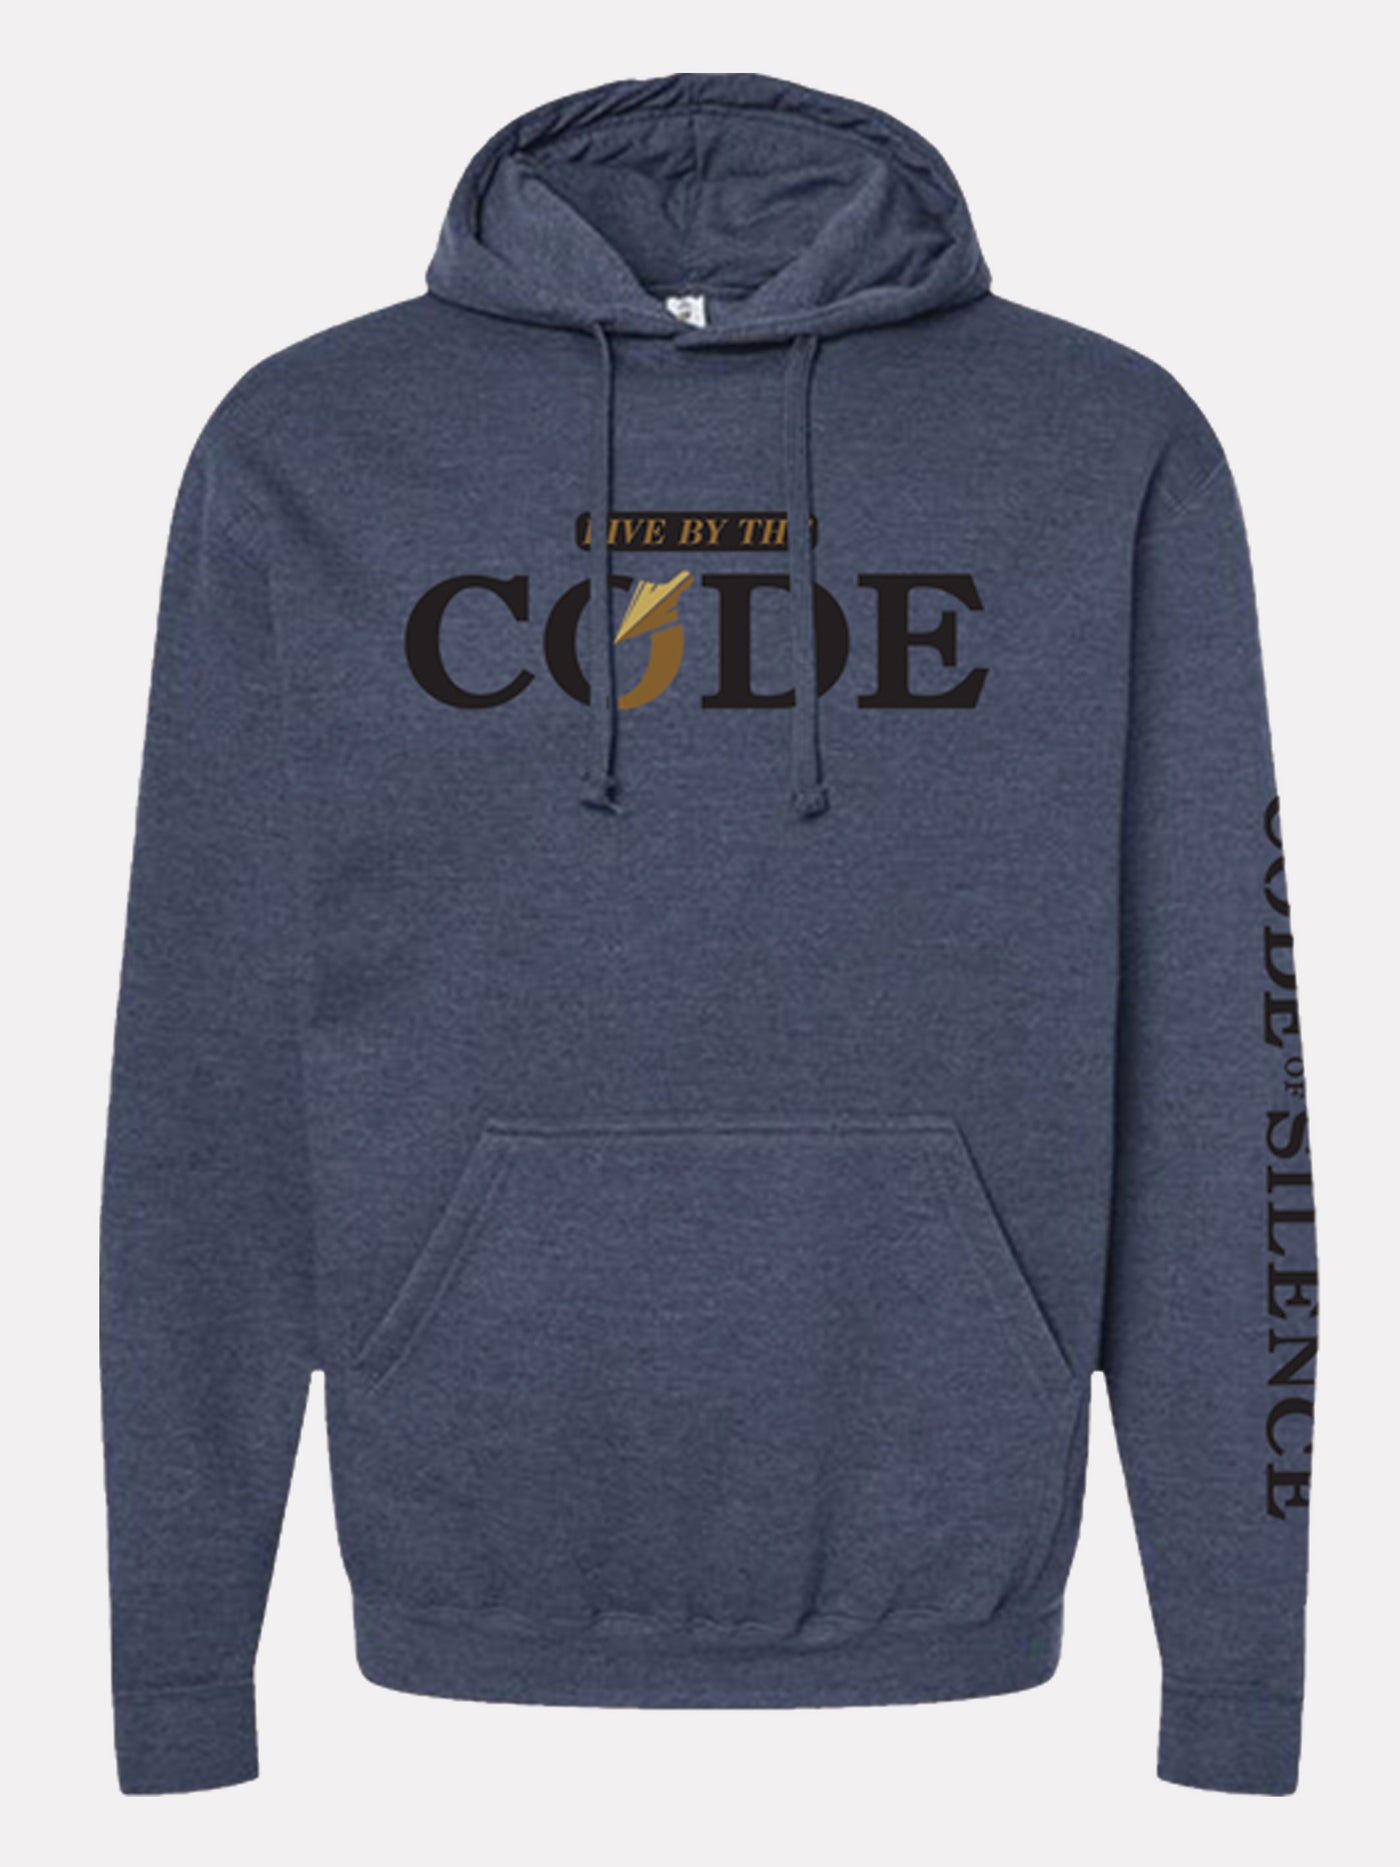 Live by the CODE Hoodie